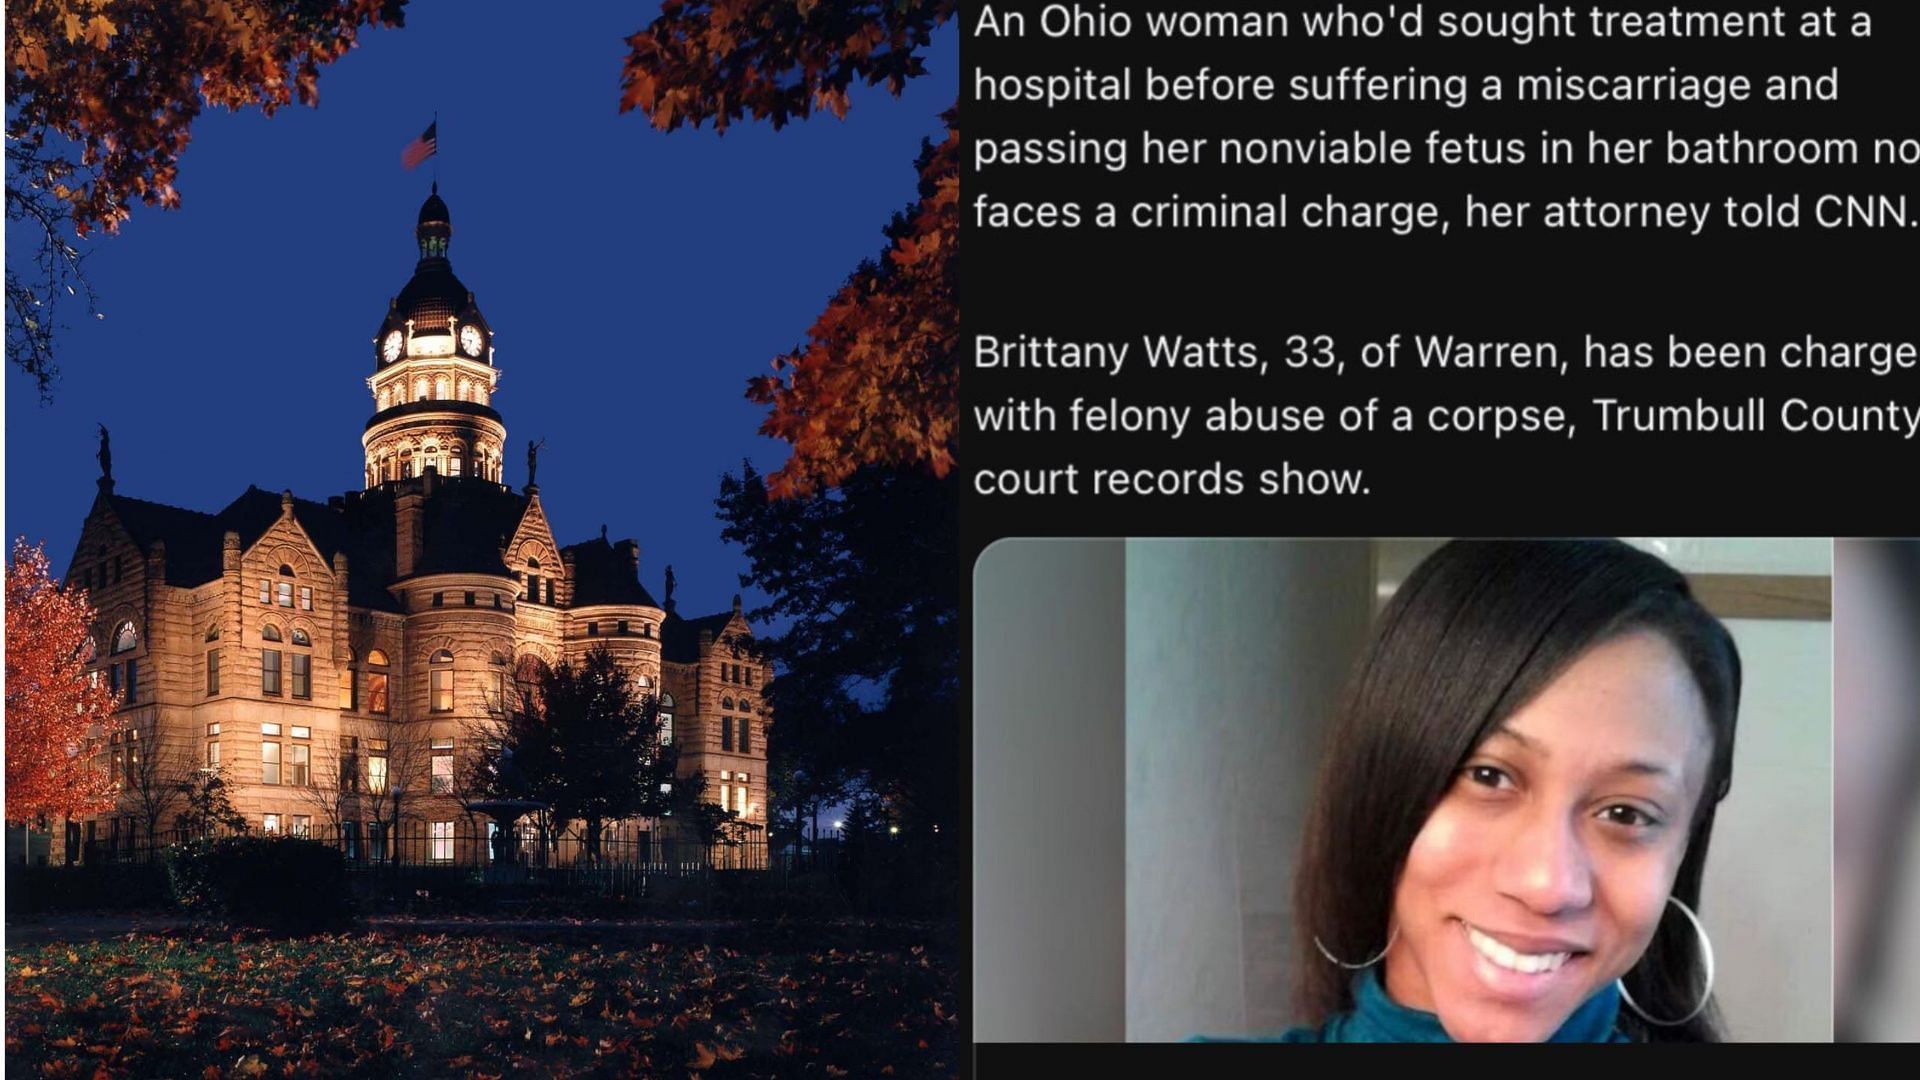 Brittany Watts has been cleared by the Trumbull County court (Image via Facebook / Susan Tobias / The Mean Progressive)